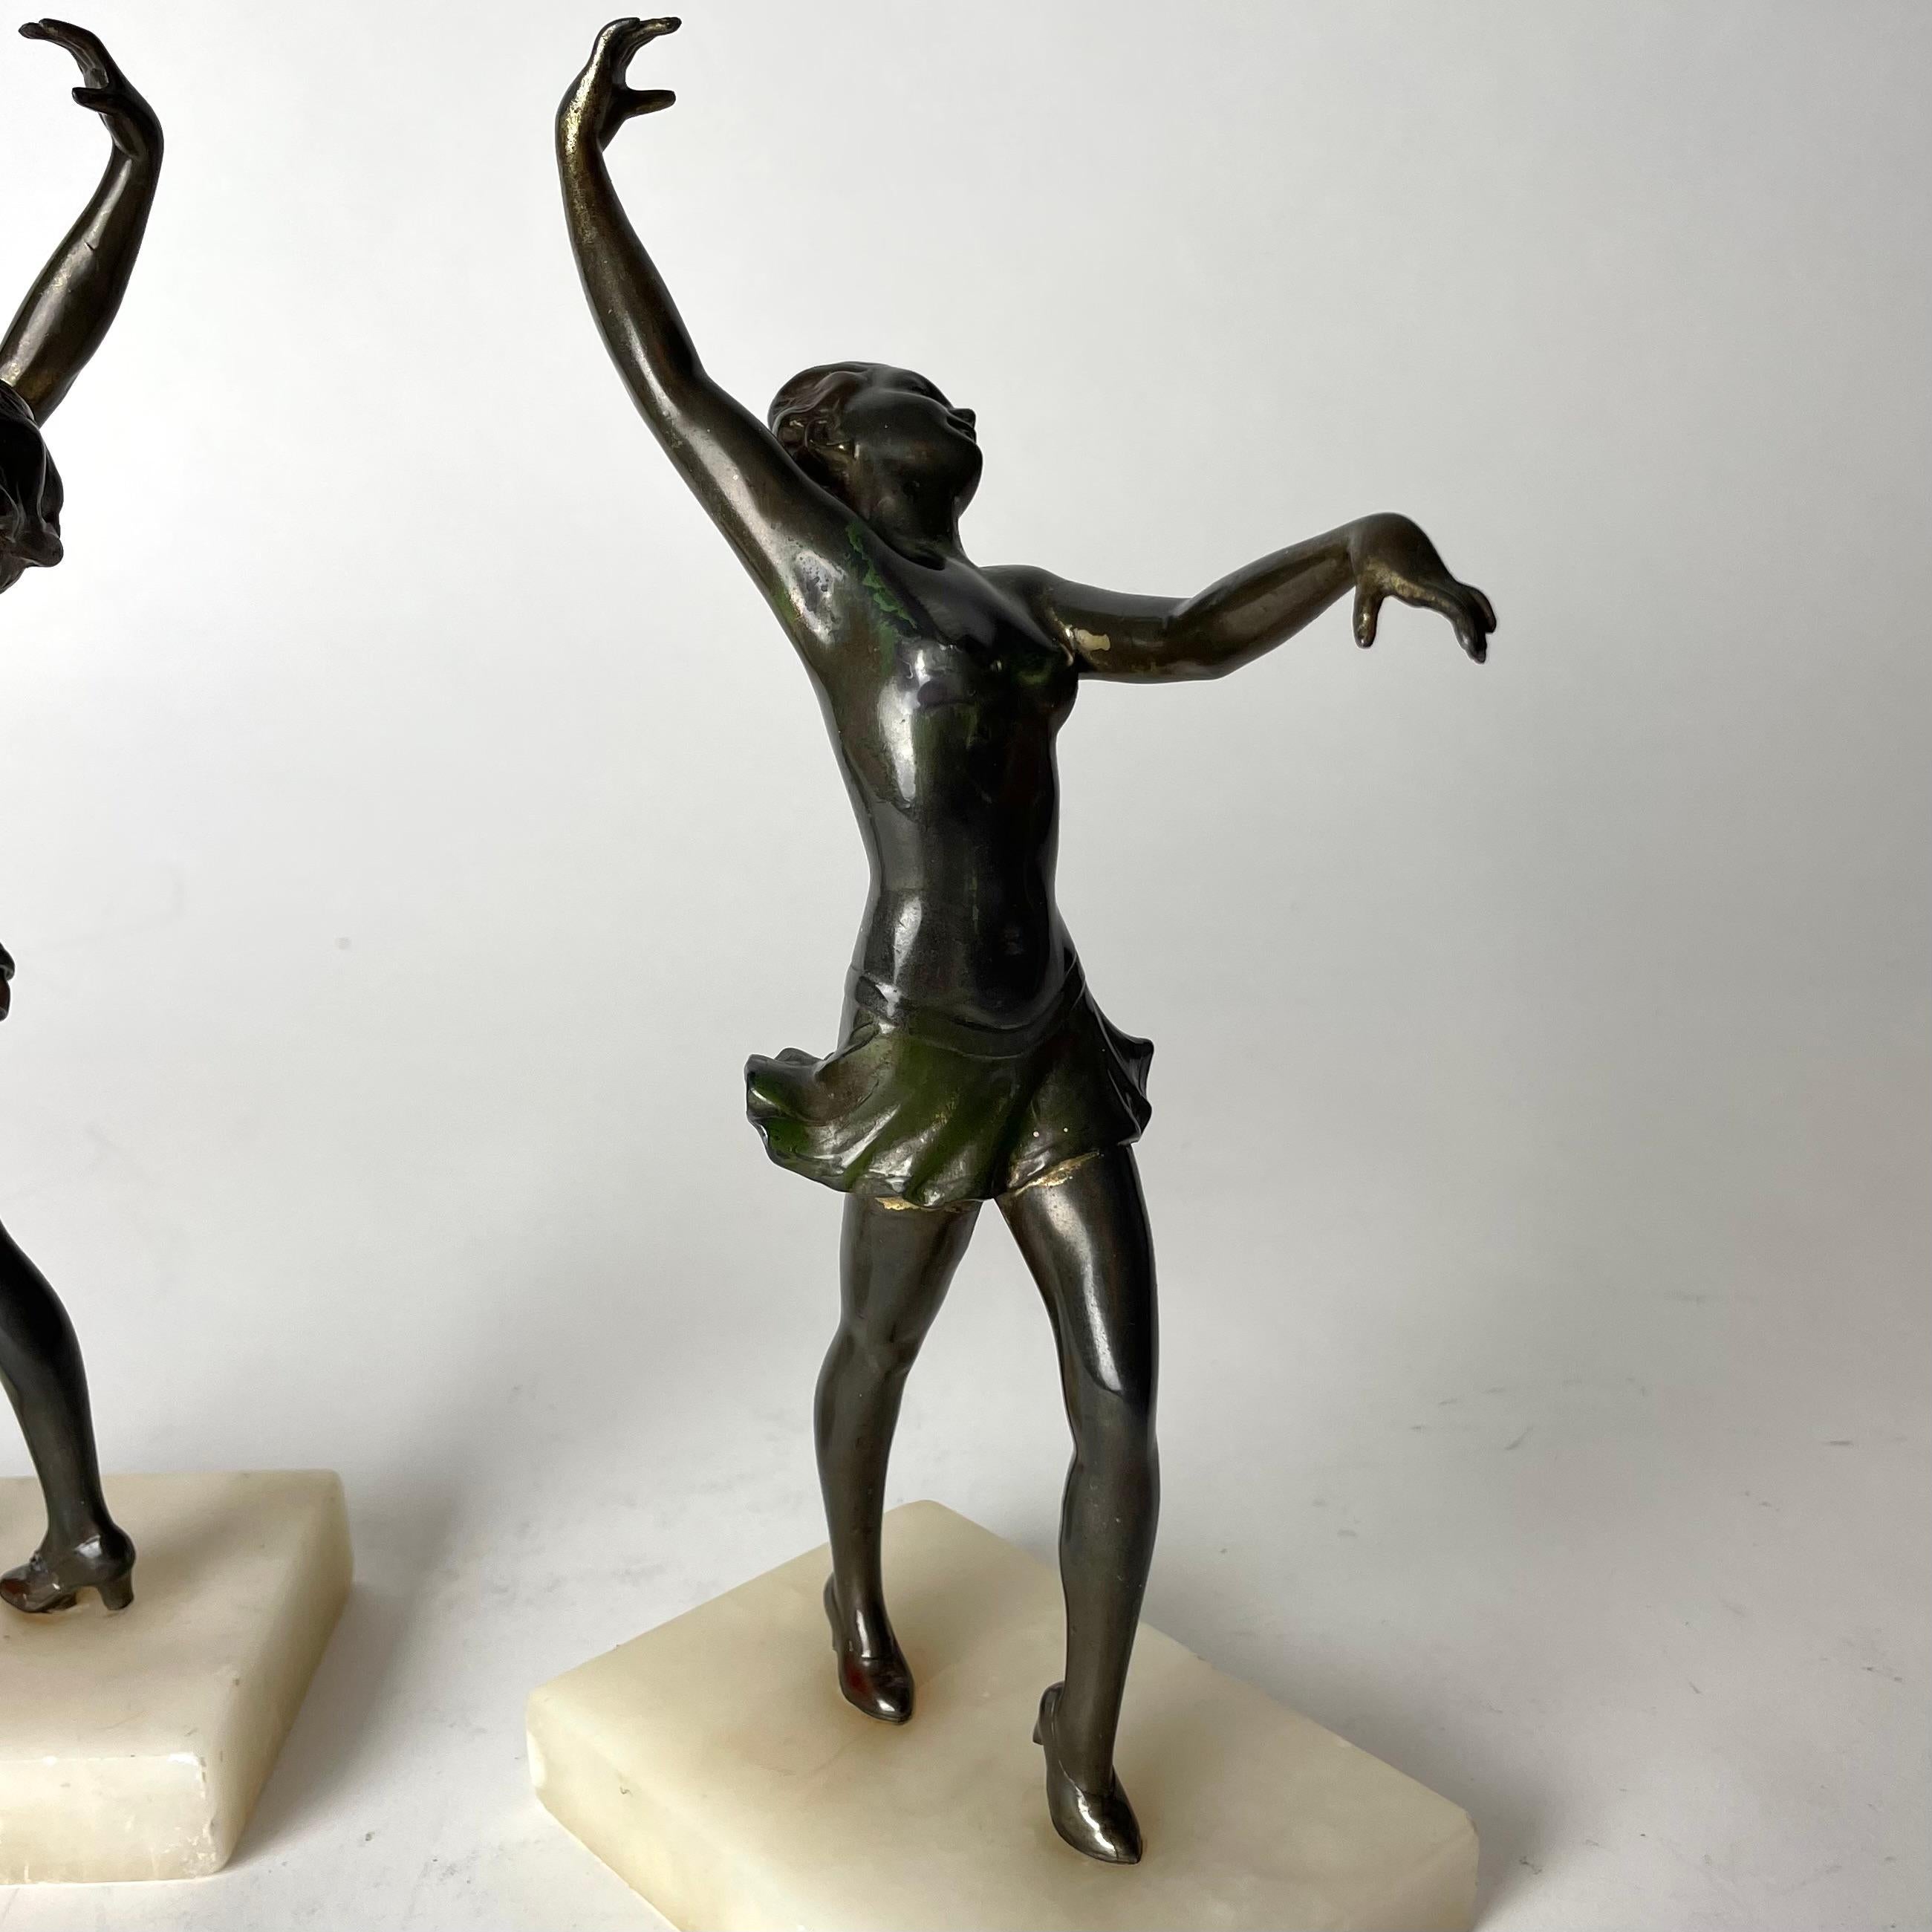 A pair of period Art Deco Bookends from 1920s-1930s with dancing women. 2